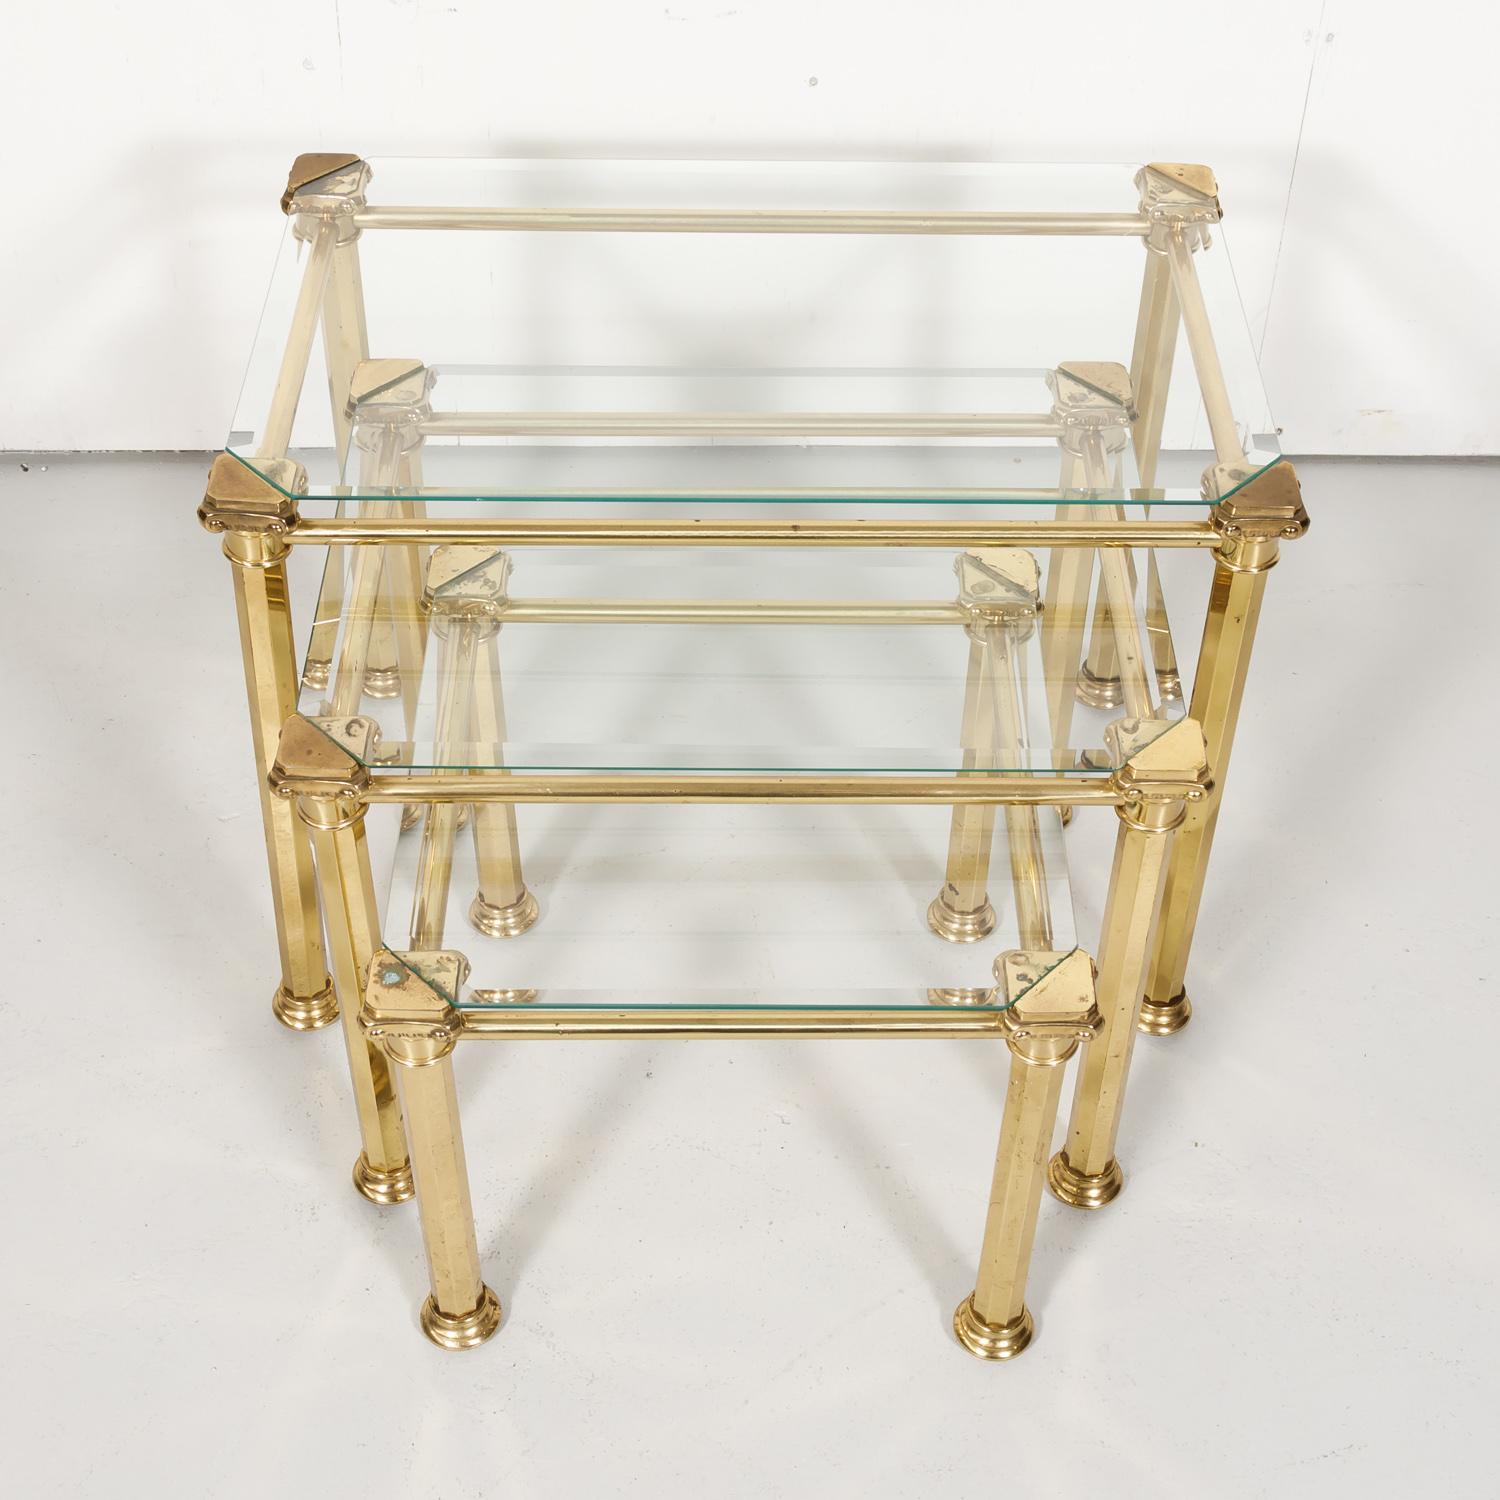 Set of Three French Mid-Century Modern Brass and Glass Nesting Tables by Maison 1